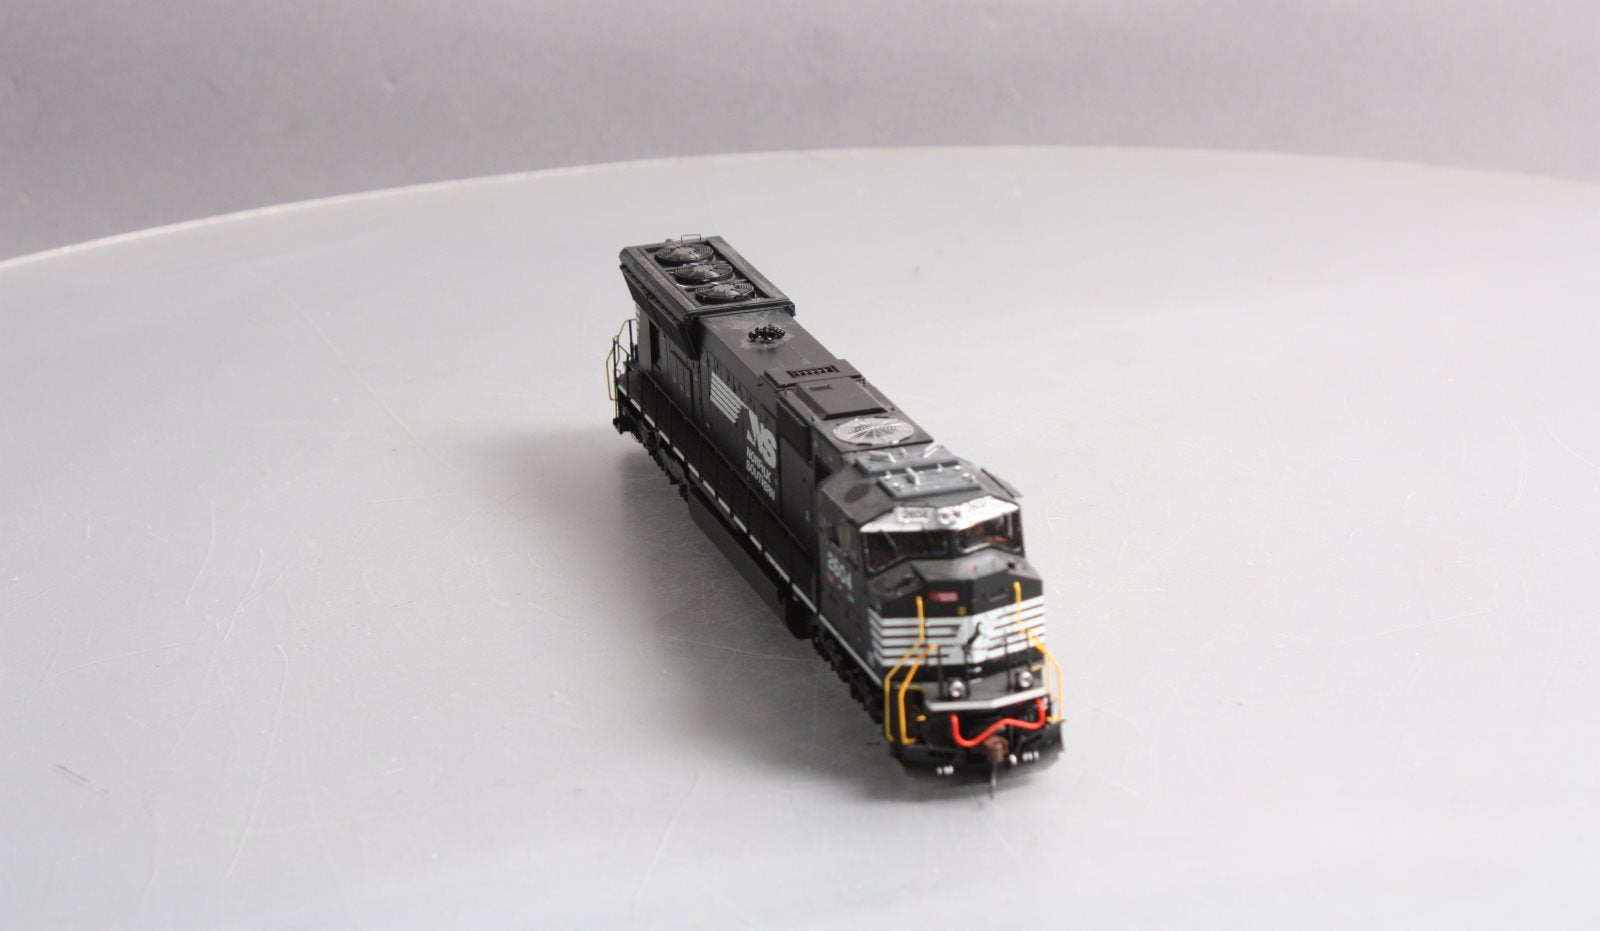 Nゲージ Athearn NorfolkSouthern NS2507 SD70-